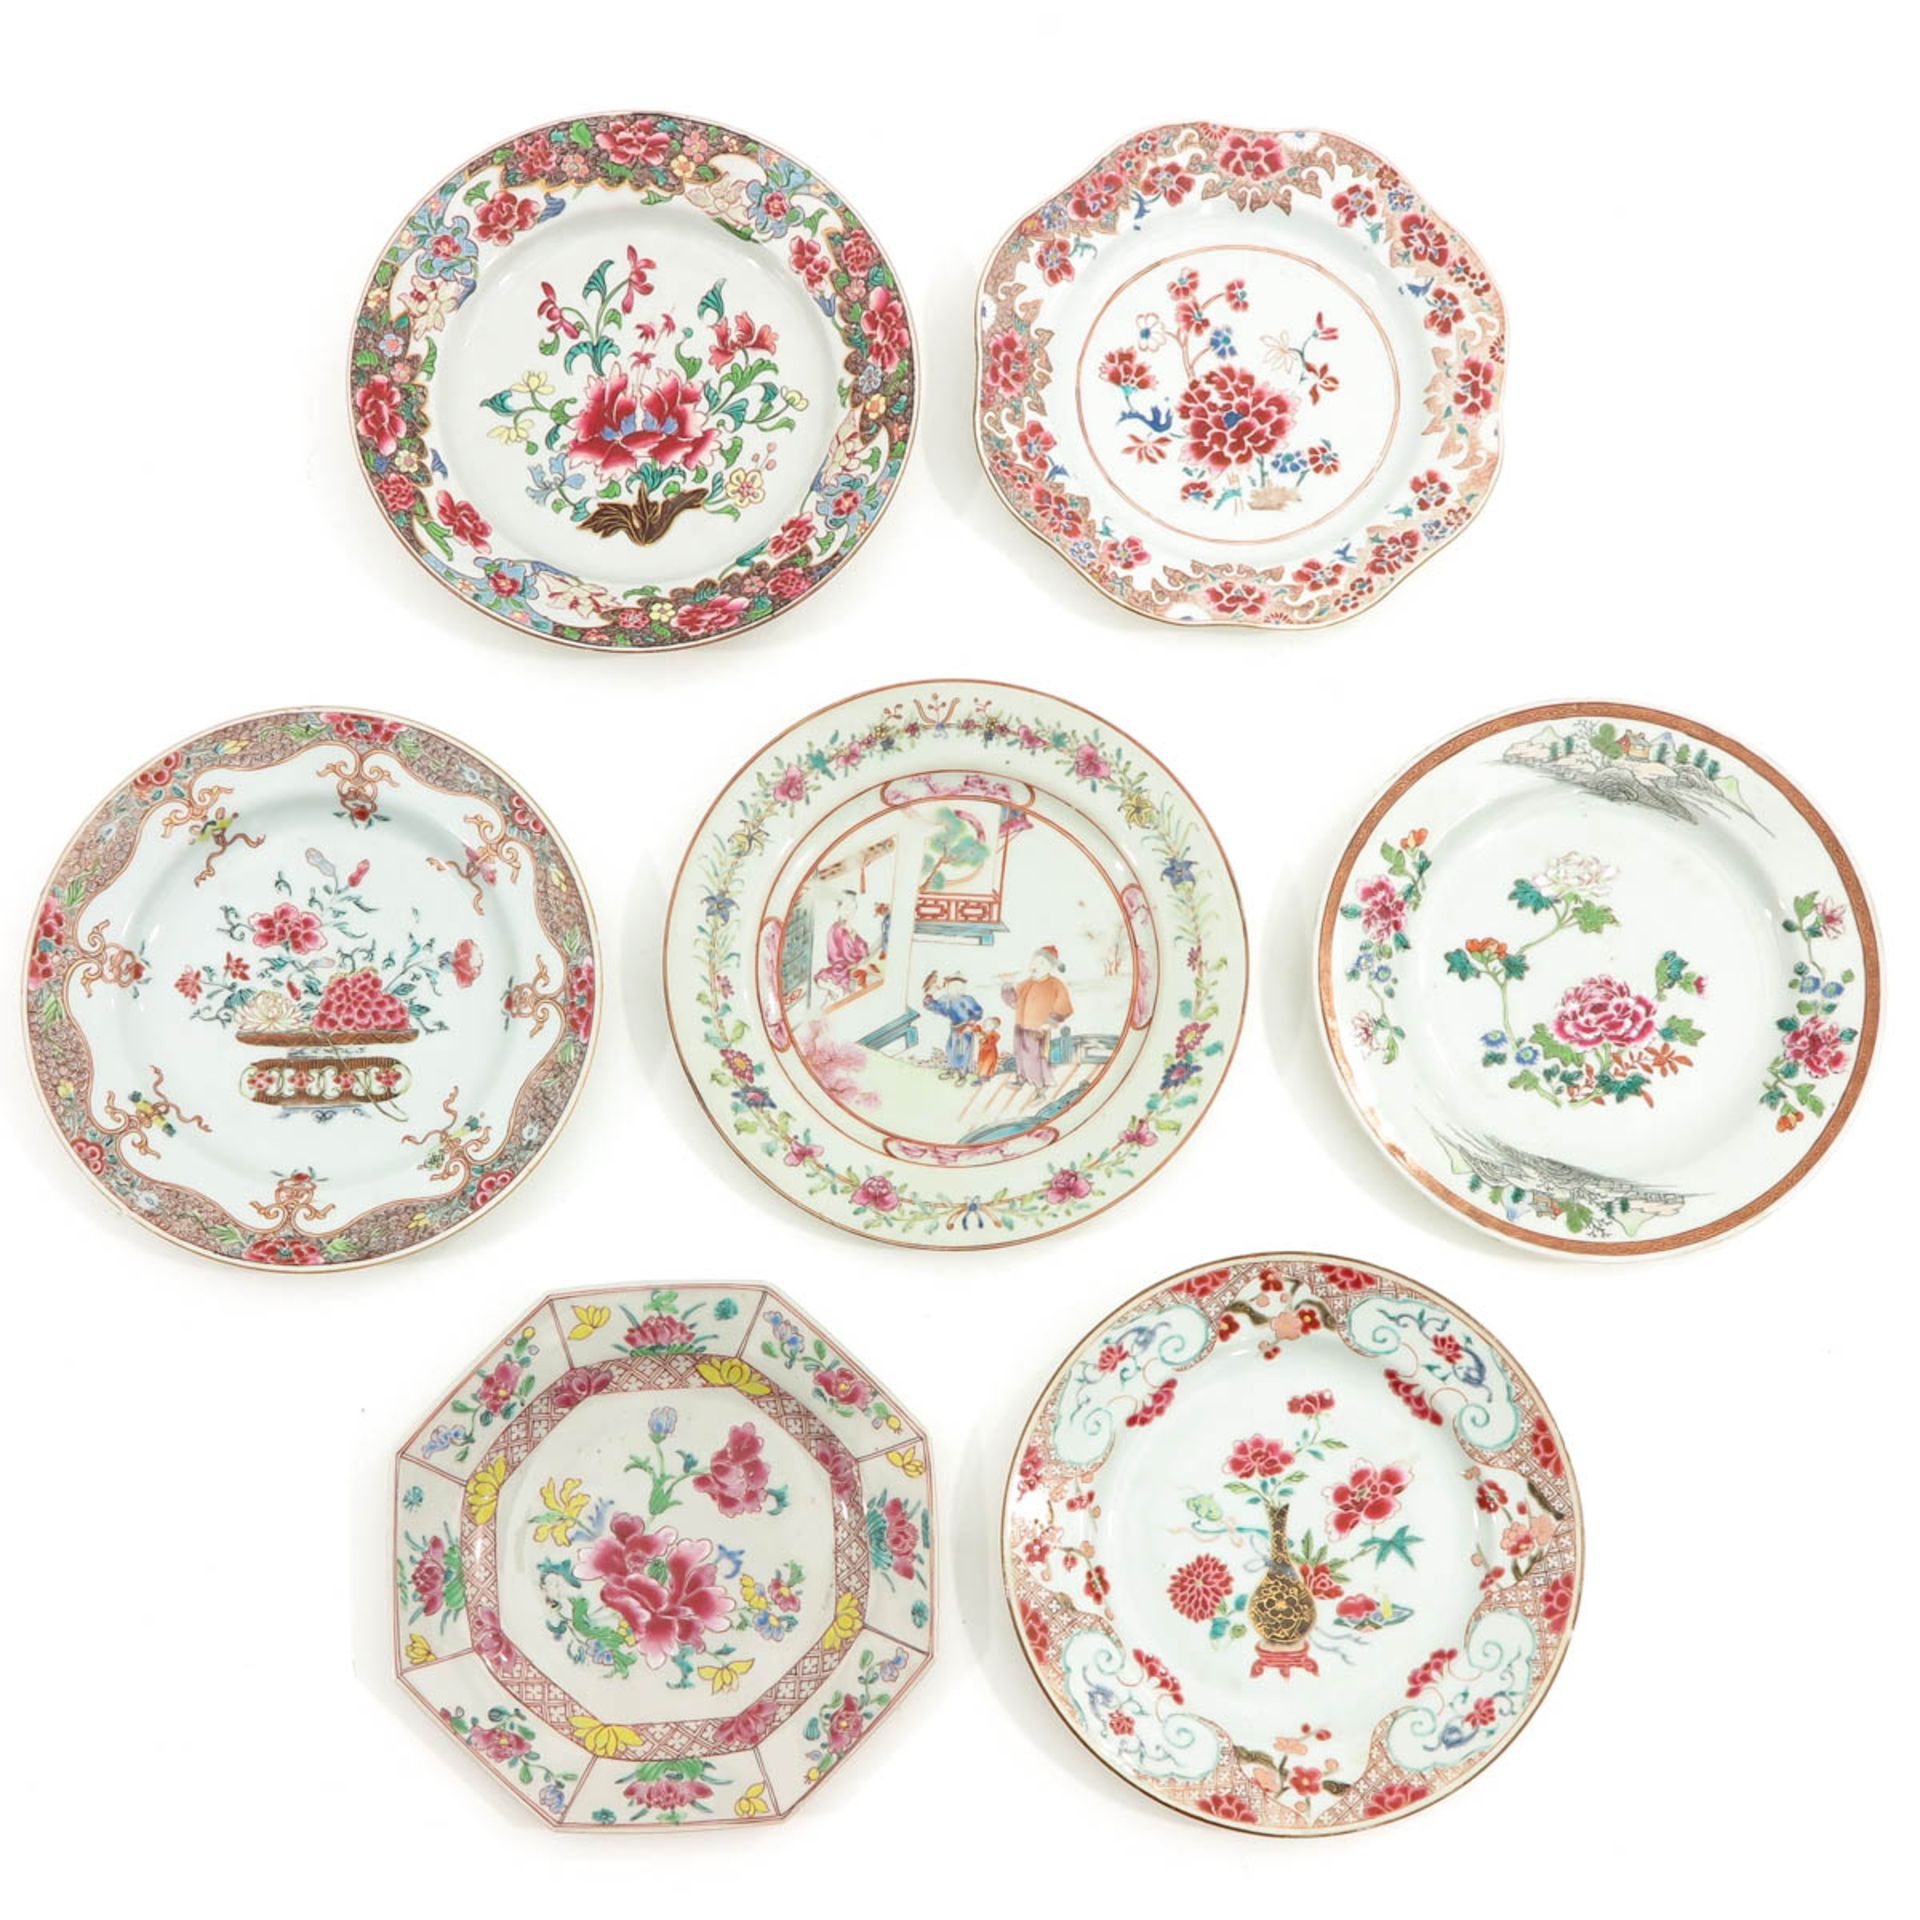 A Collection of 7 Famille Rose Plates